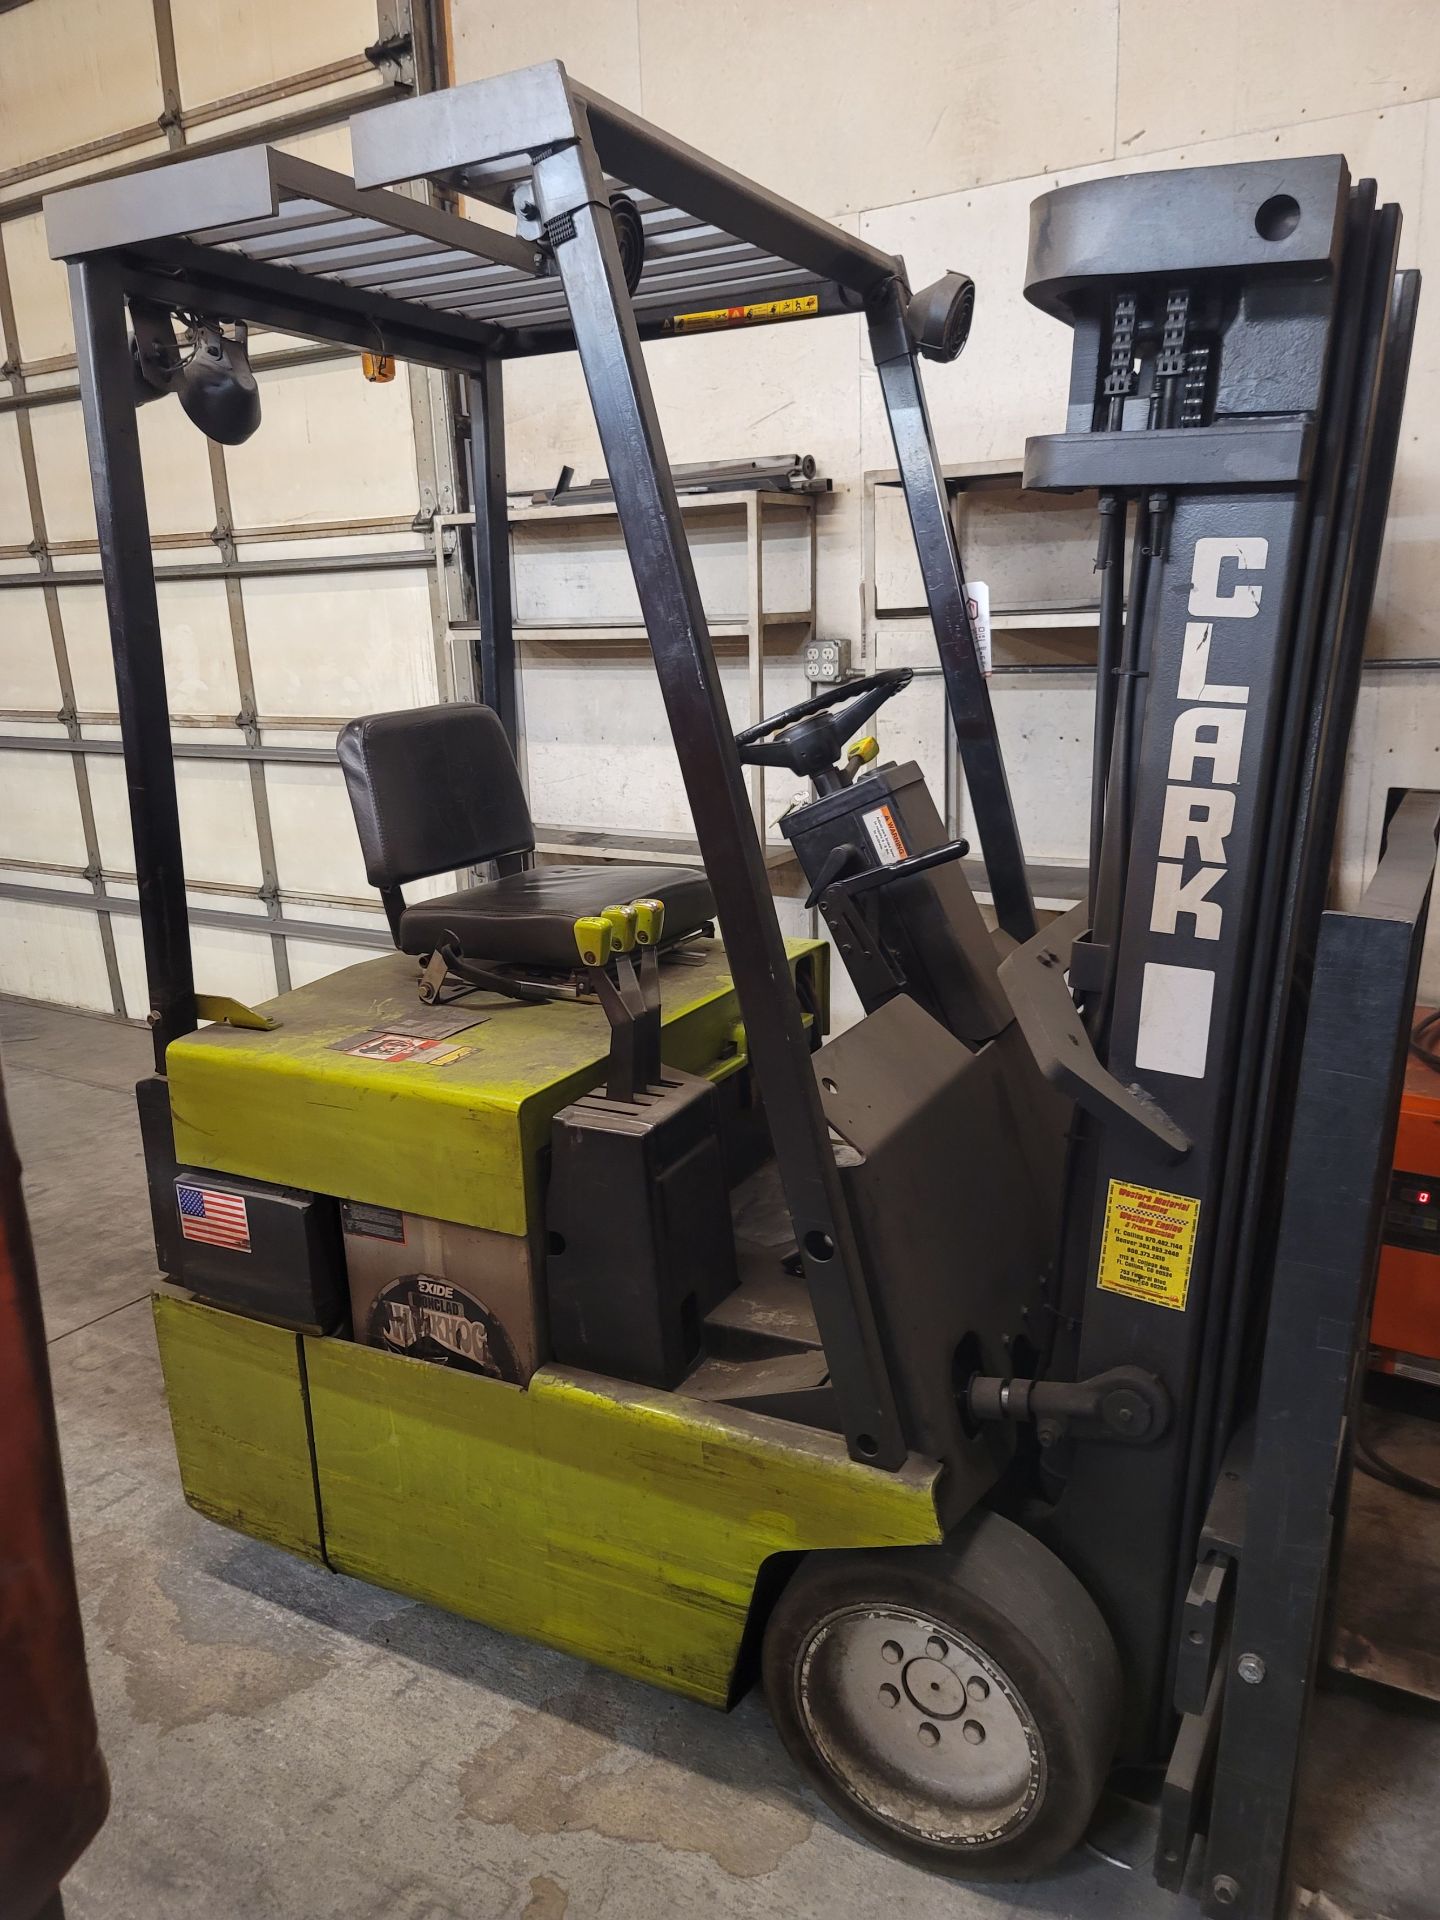 CLARK TM15S ELECTRIC FORKLIFT, 3,000 LB CAPACITY, 3-STAGE MAST, SIDE SHIFT, 188" LIFT HEIGHT, - Image 3 of 8